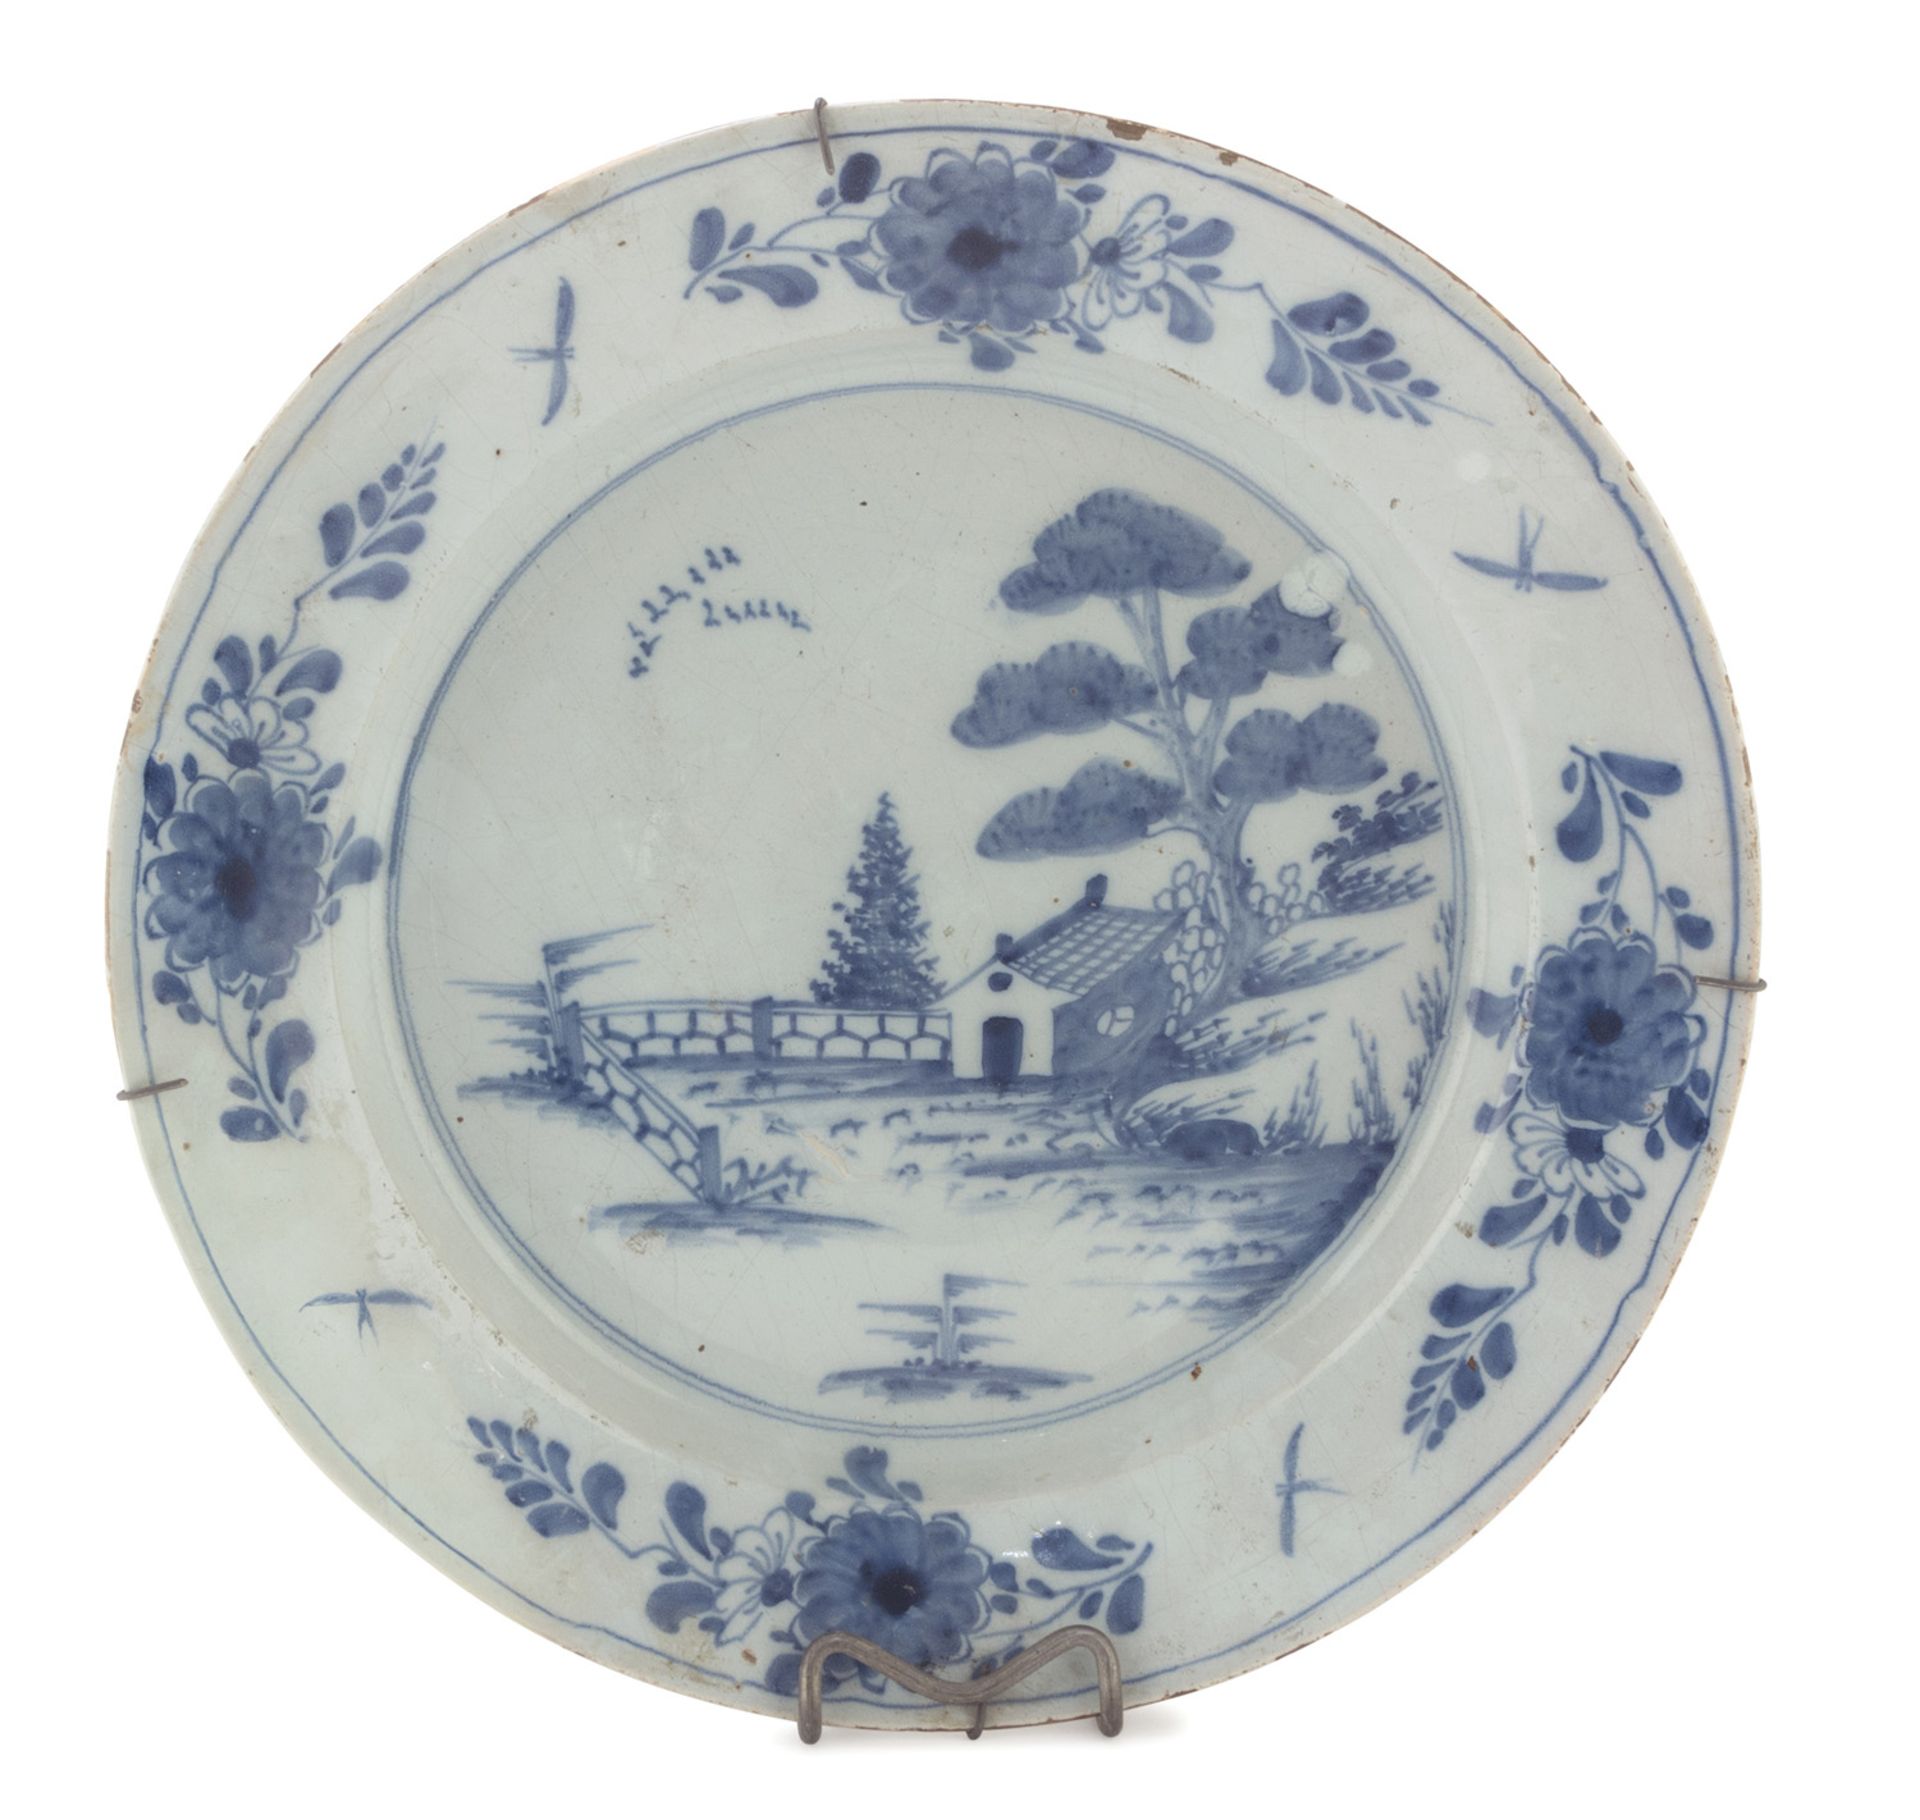 LARGE PORCELAIN PLATE PROBABLY MILAN LATE 18th CENTURY